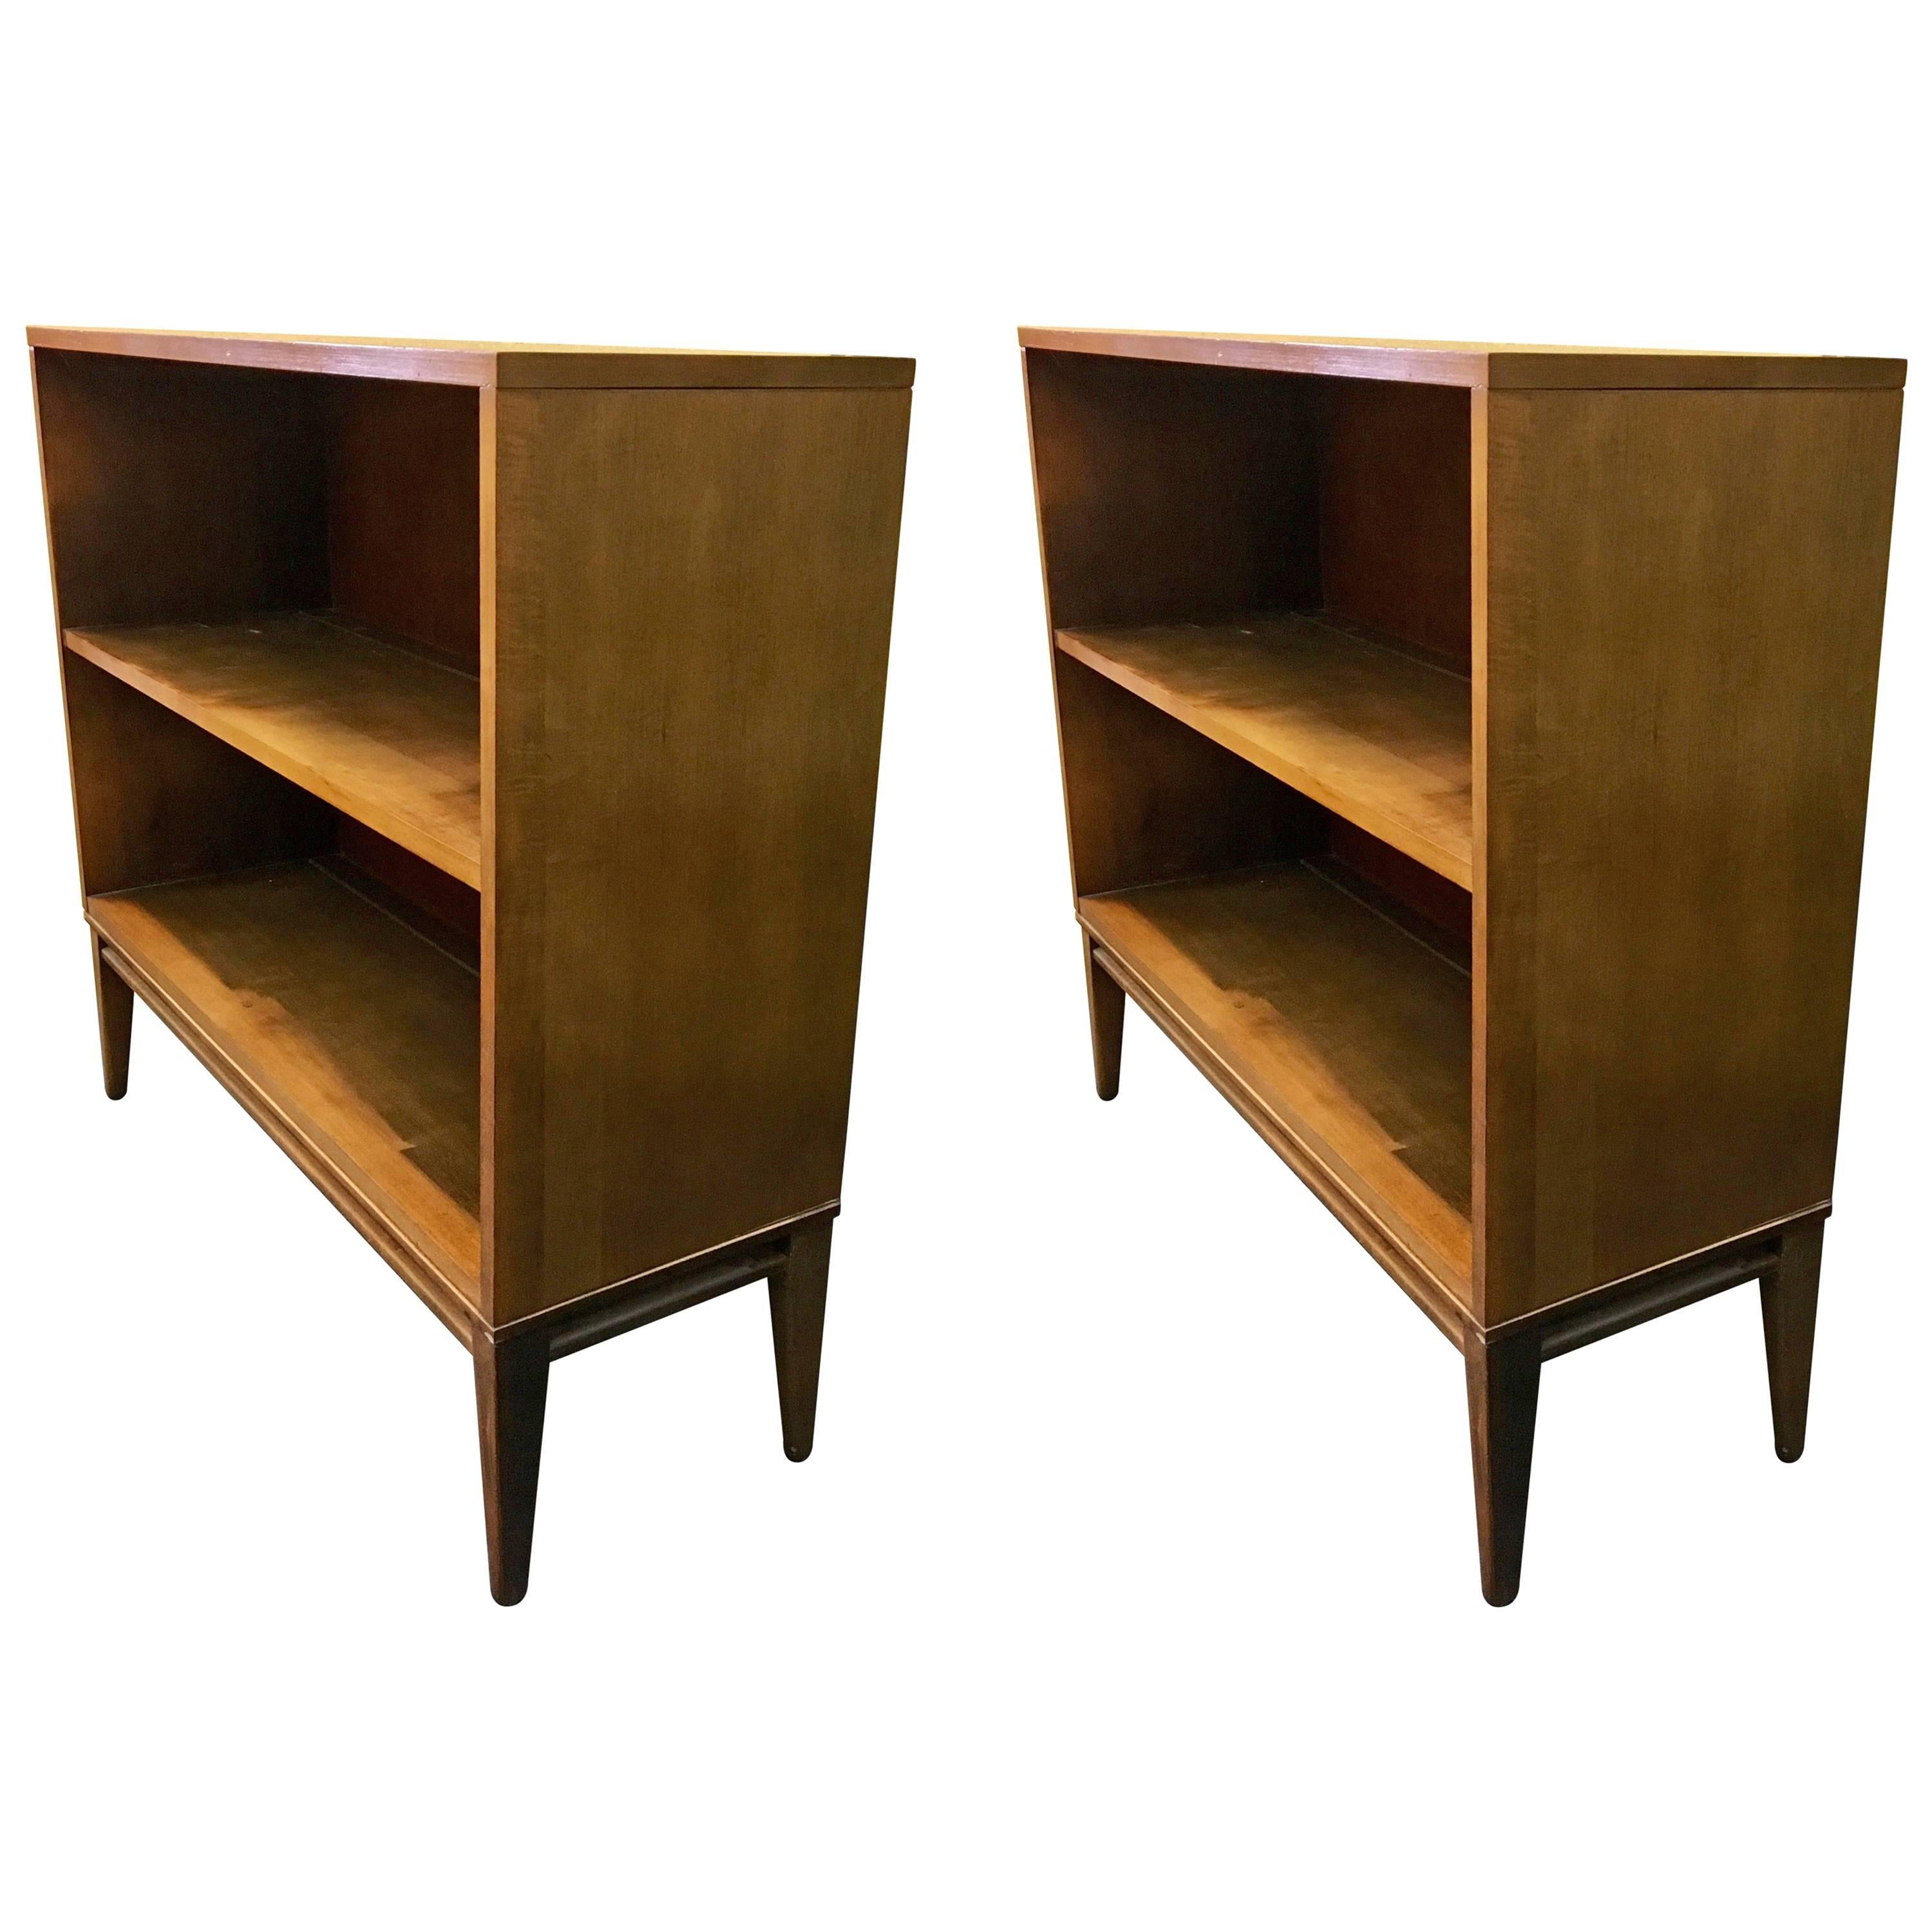 Pair of Solid Wood Bookcases by Paul McCobb Planner Group